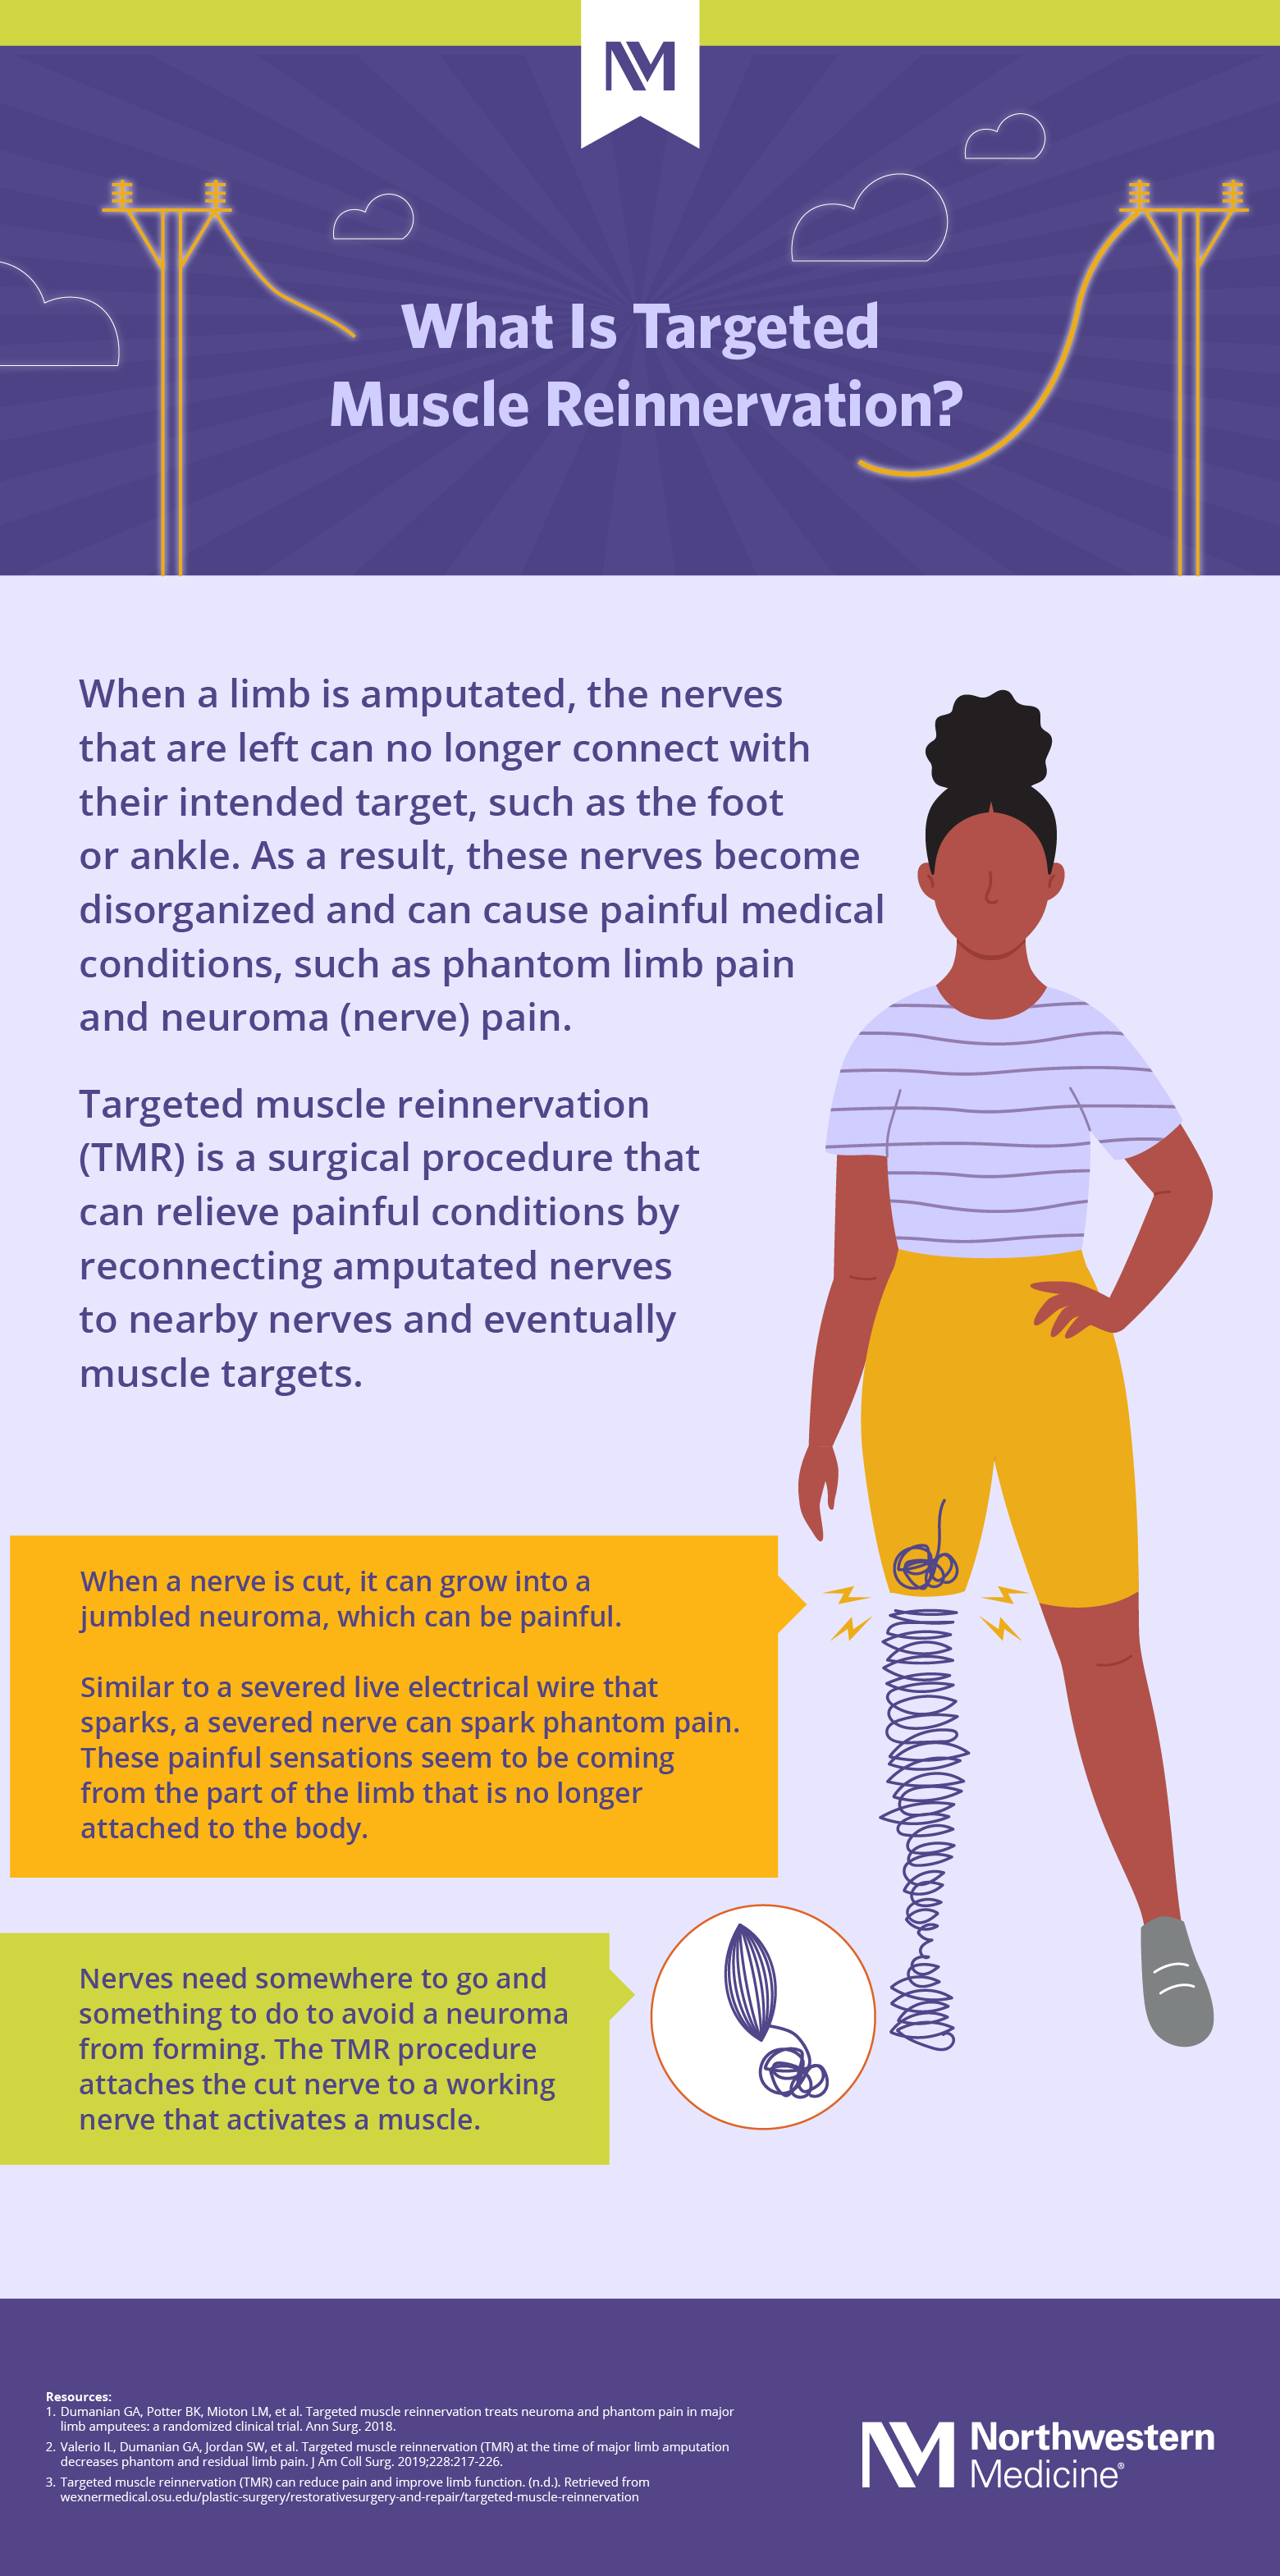 A drawing of a person with a below-the-knee amputation and a cut nerve forming a neuroma. Reconnection of cut nerve to a muscle also shown. Text on the infographic reads: When a limb is amputated, the nerves that are left can no longer connect with their intended target, such as the foot or ankle. As a result, these nerves become disorganized and can cause painful medical conditions, such as phantom limb pain and neuroma (nerve) pain.
Targeted muscle reinnervation (TMR) is a surgical procedure that can relieve painful conditions by reconnecting amputated nerves to nearby nerves and eventually muscle targets. When a nerve is cut, it can grow into a jumbled neuroma, which can be painful. Similar to a severed live electrical wire that sparks, a severed nerve can spark phantom pain. These painful sensations seem to be coming from the part of the limb that is no longer attached to the body. Nerves need somewhere to go and something to do to avoid a neuroma from forming. The TMR procedure attaches the cut nerve to a working nerve that activates a muscle.